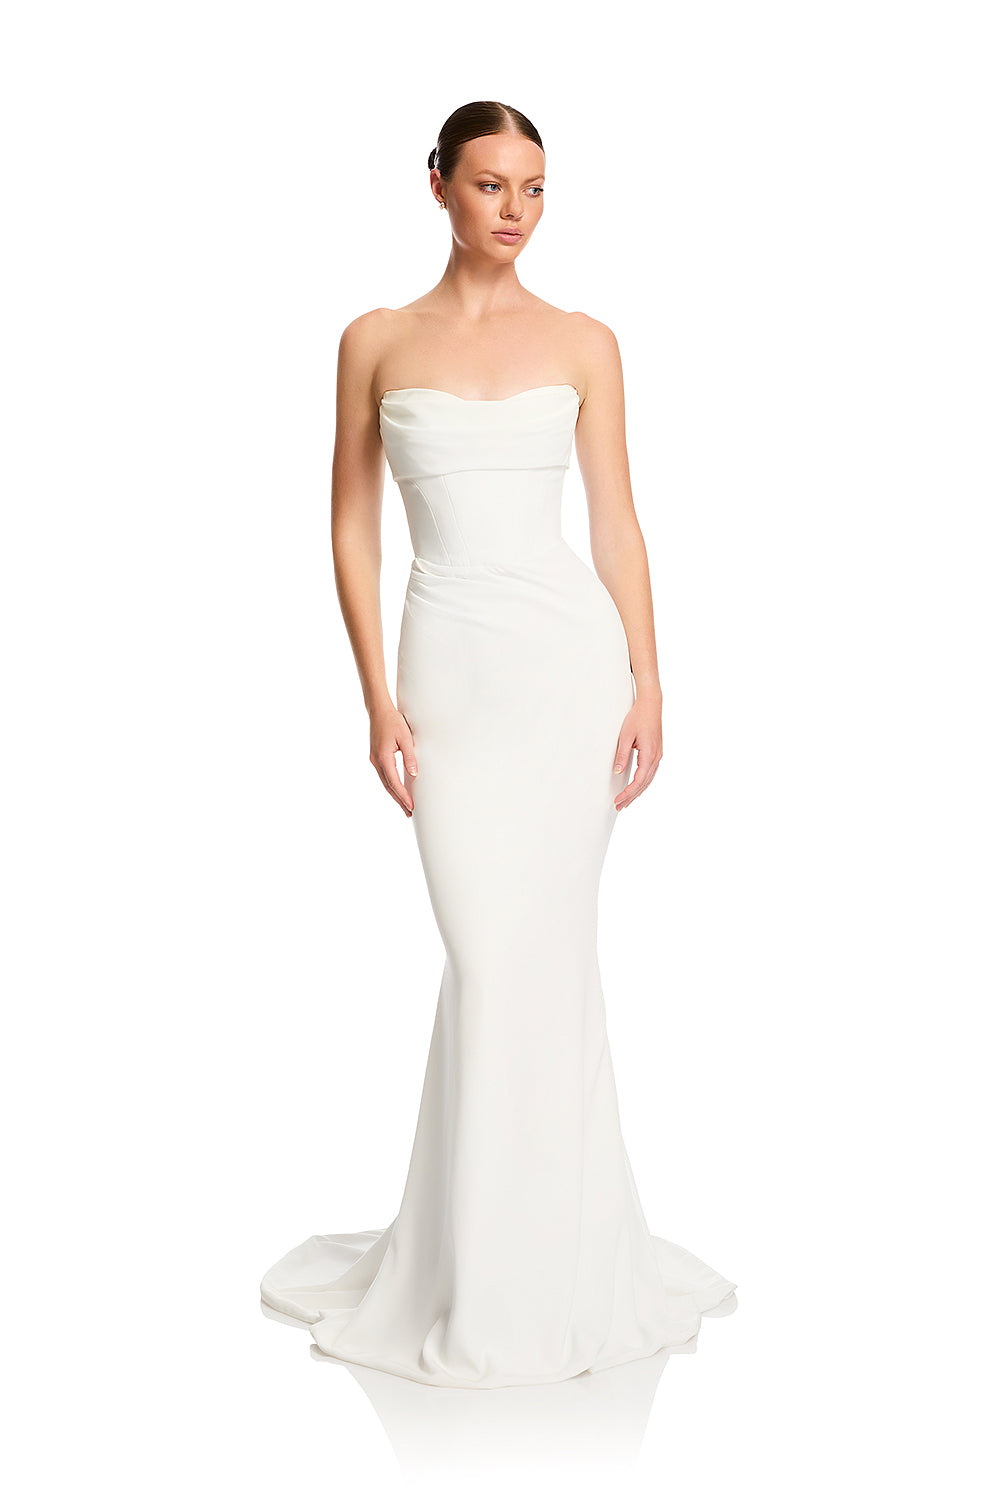 Discover the Wedding Dress Silhouette That Will Enhance Your Hourglass  Figure, Beau Belles